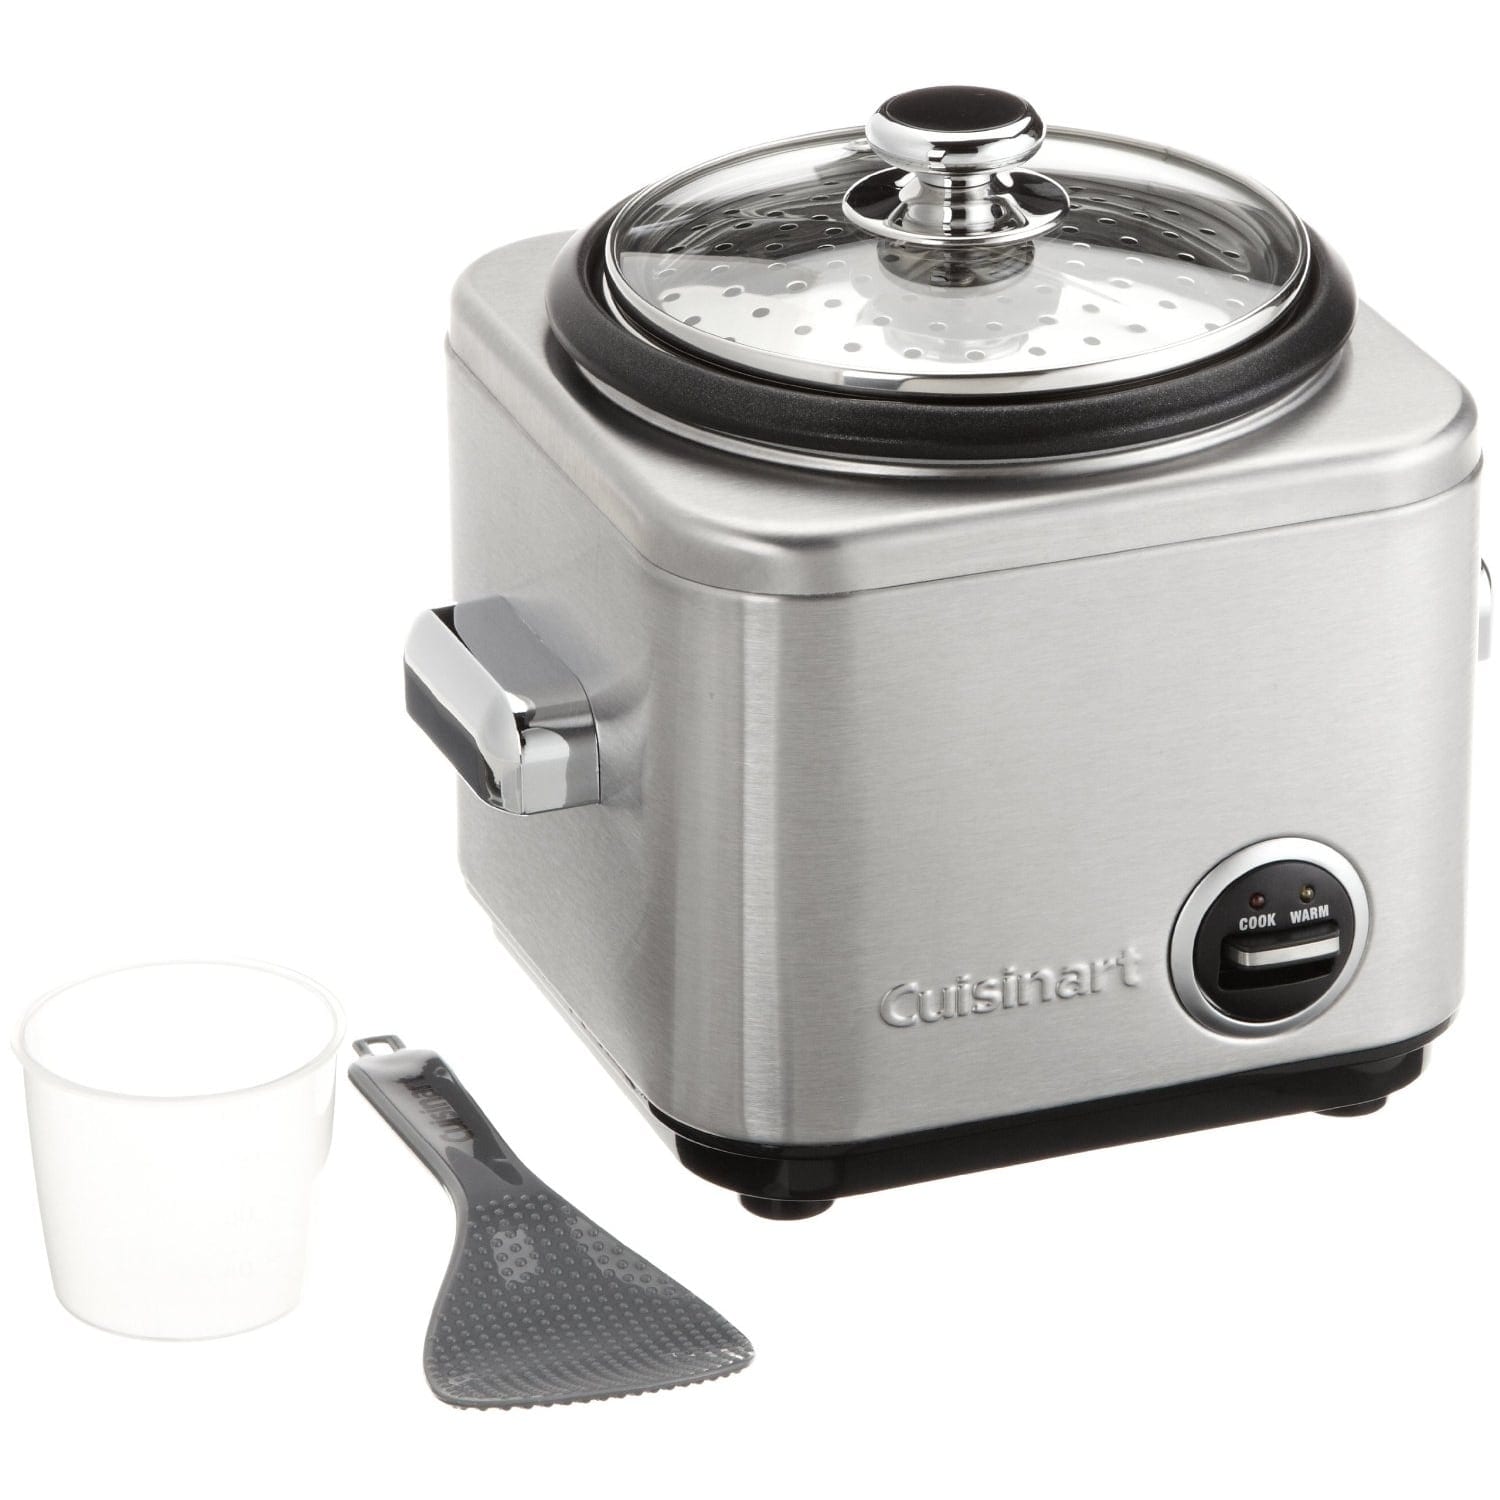 https://ak1.ostkcdn.com/images/products/is/images/direct/976631355e097bba0bada44aaa1468e4328b9684/Cuisinart-CRC-400-4-Cup-Rice-Cooker%2C-Stainless-Steel-Exterior.jpg